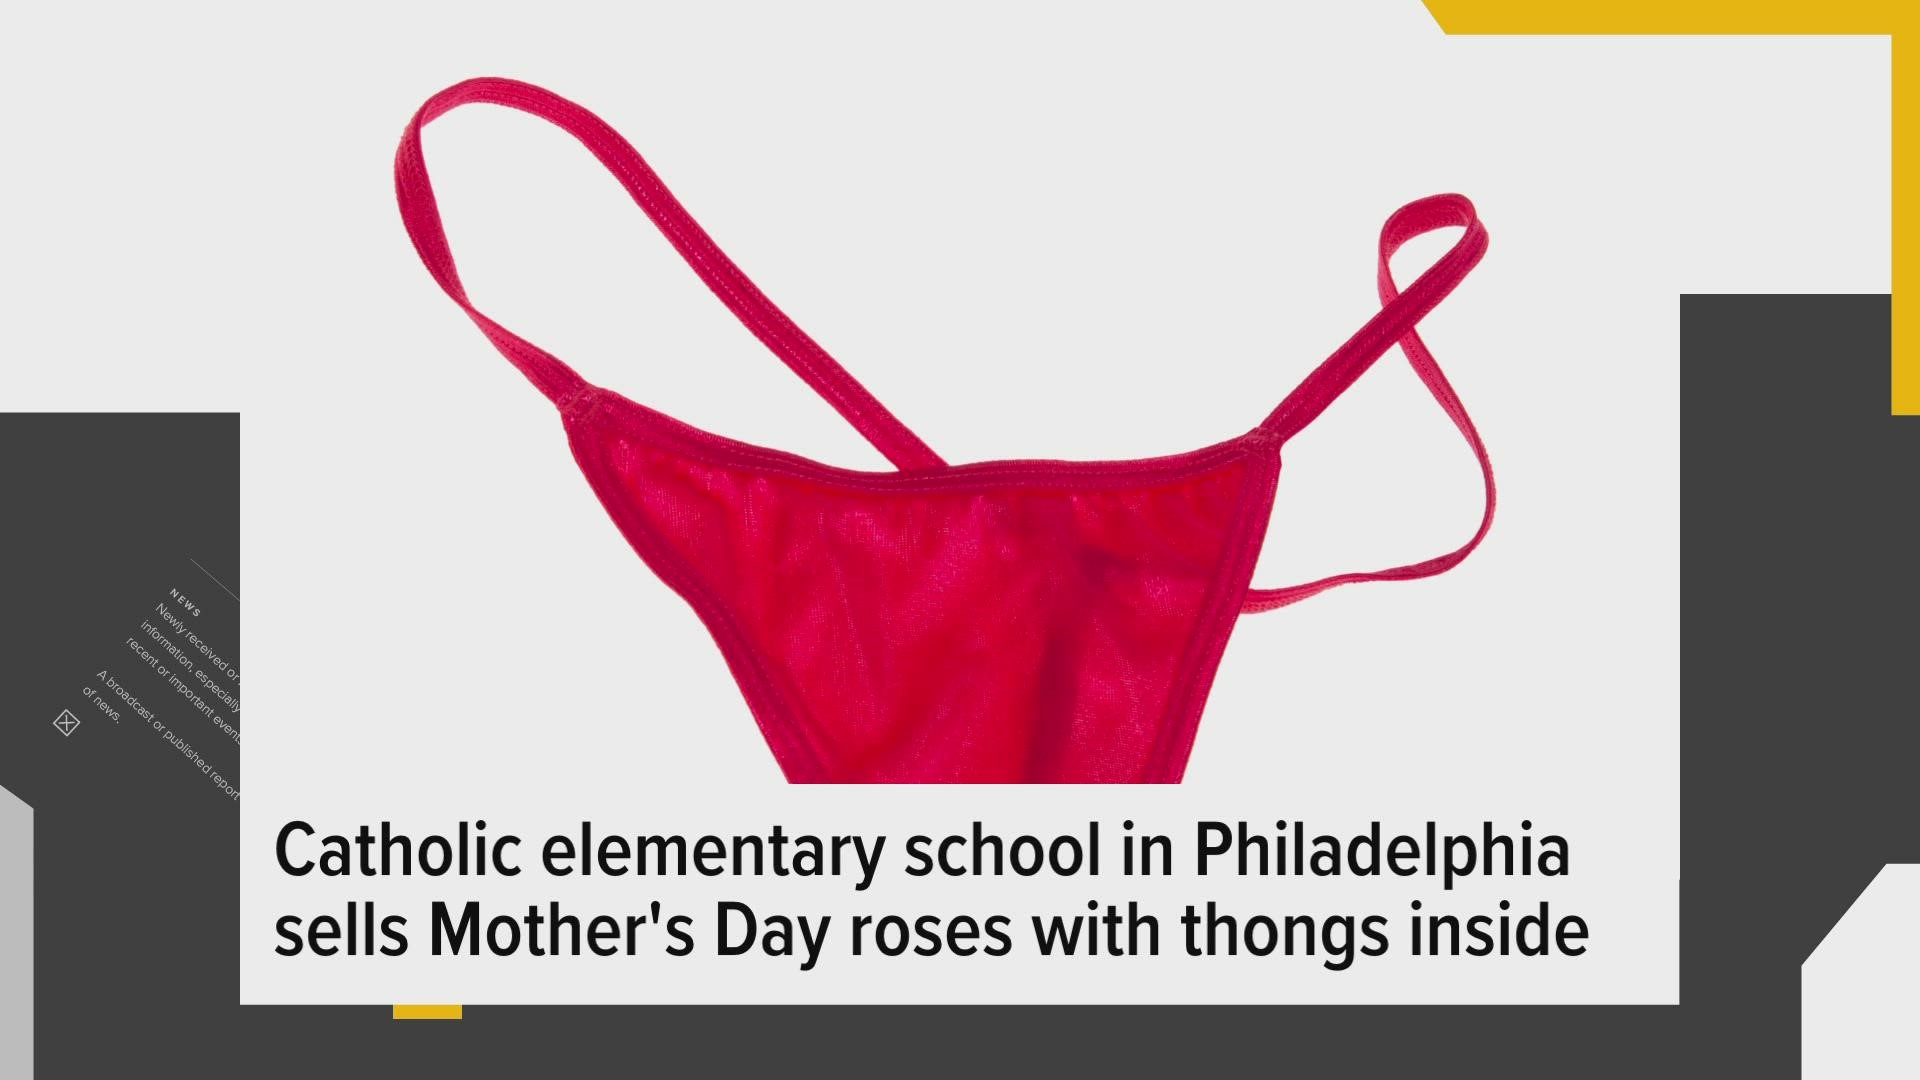 Parents were surprised when their child brought home a rose that was filled with red lingerie for Mother's Day.